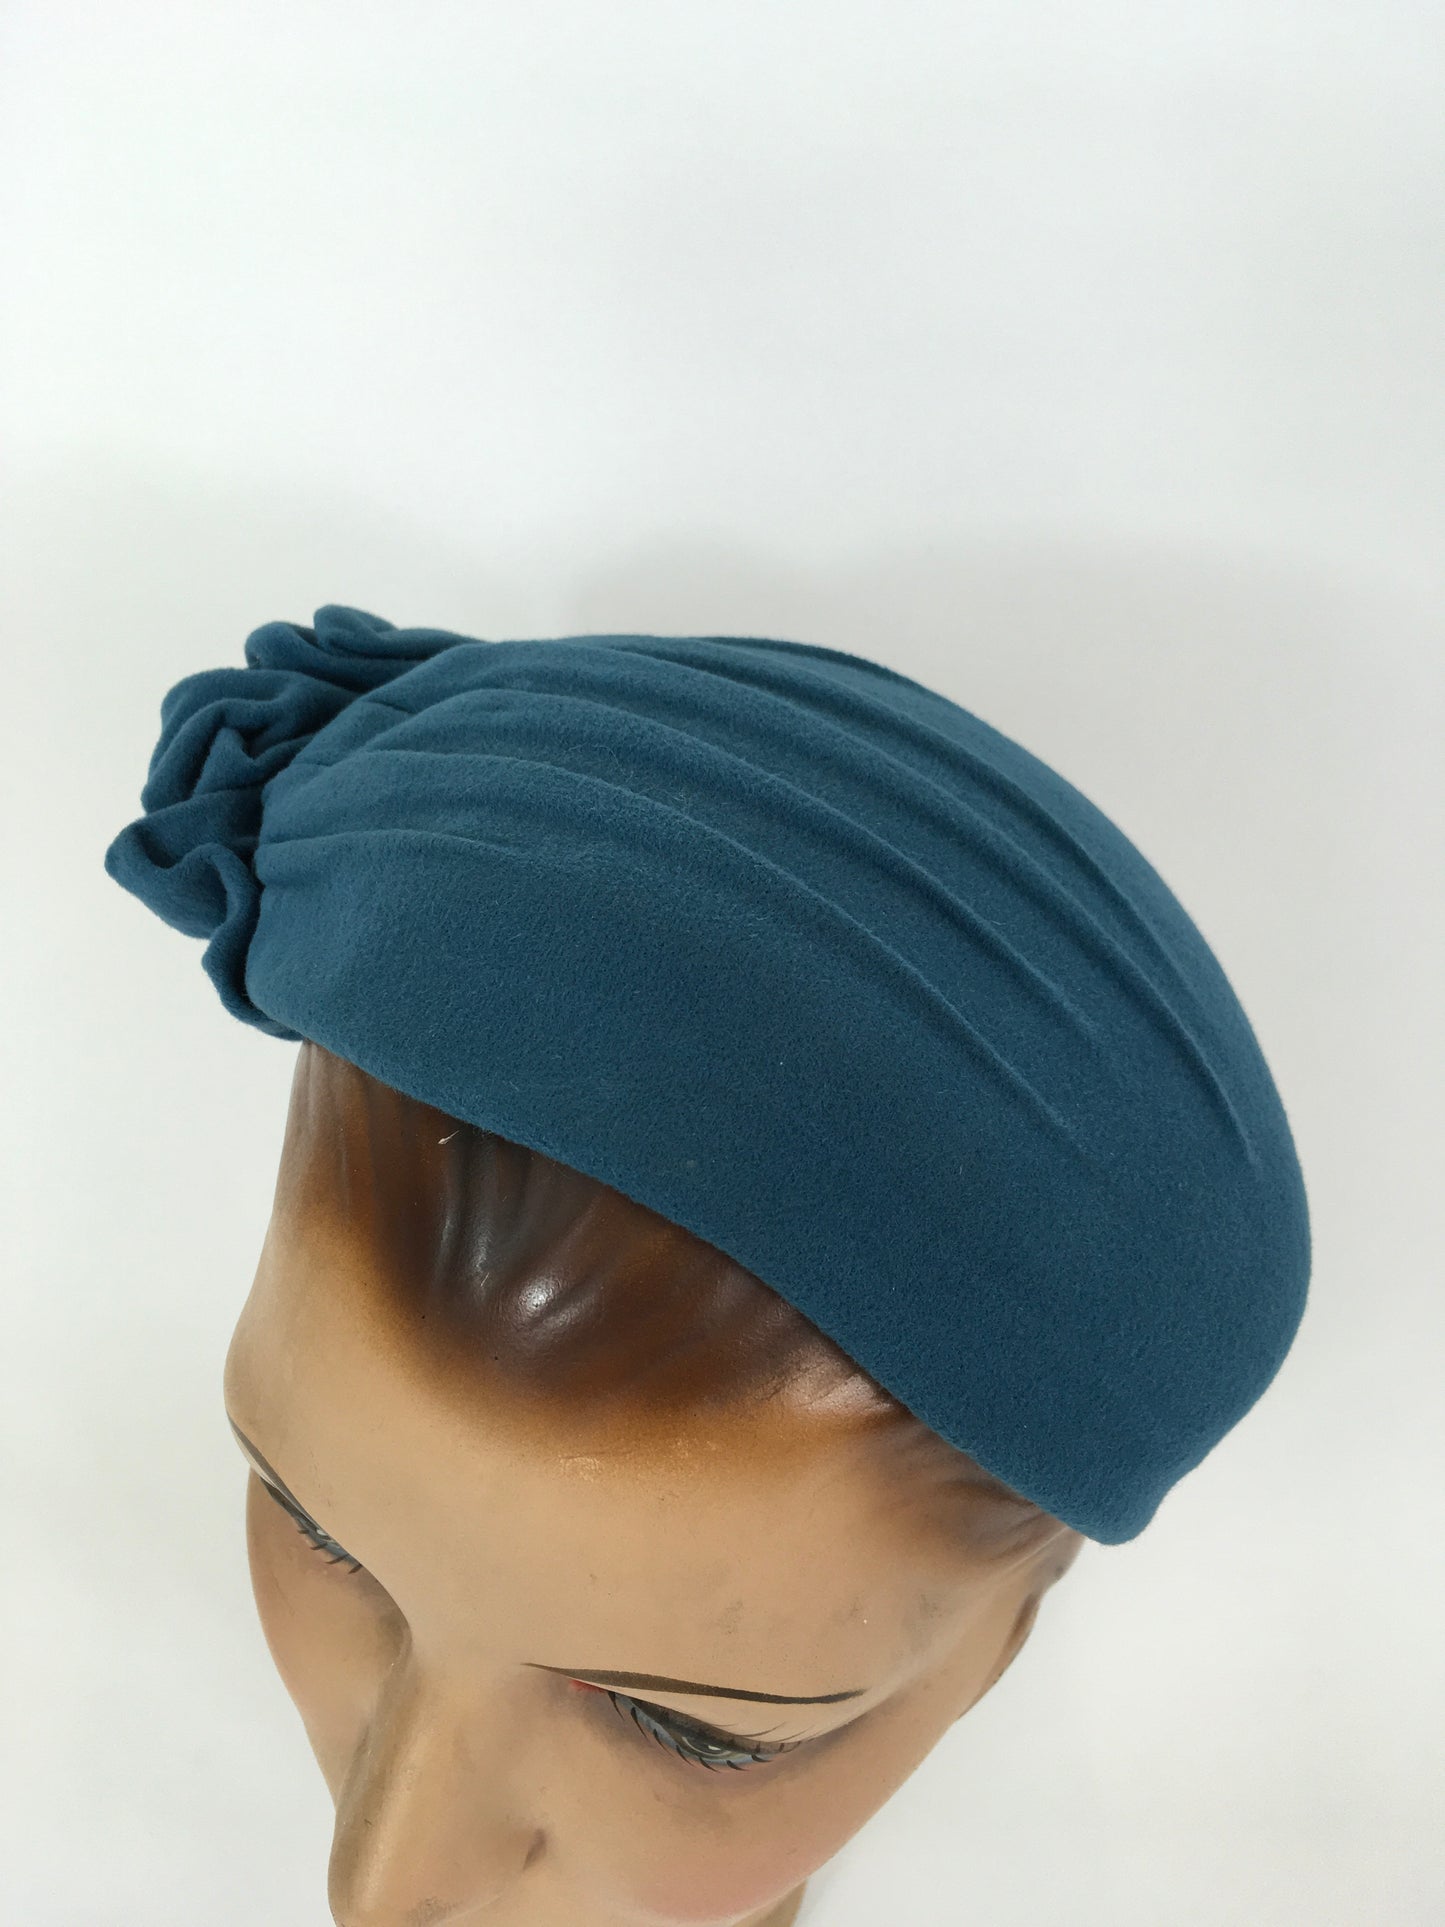 Original Late 1940’s early 1950’s Darling Structured Hat - In A Warm Teal